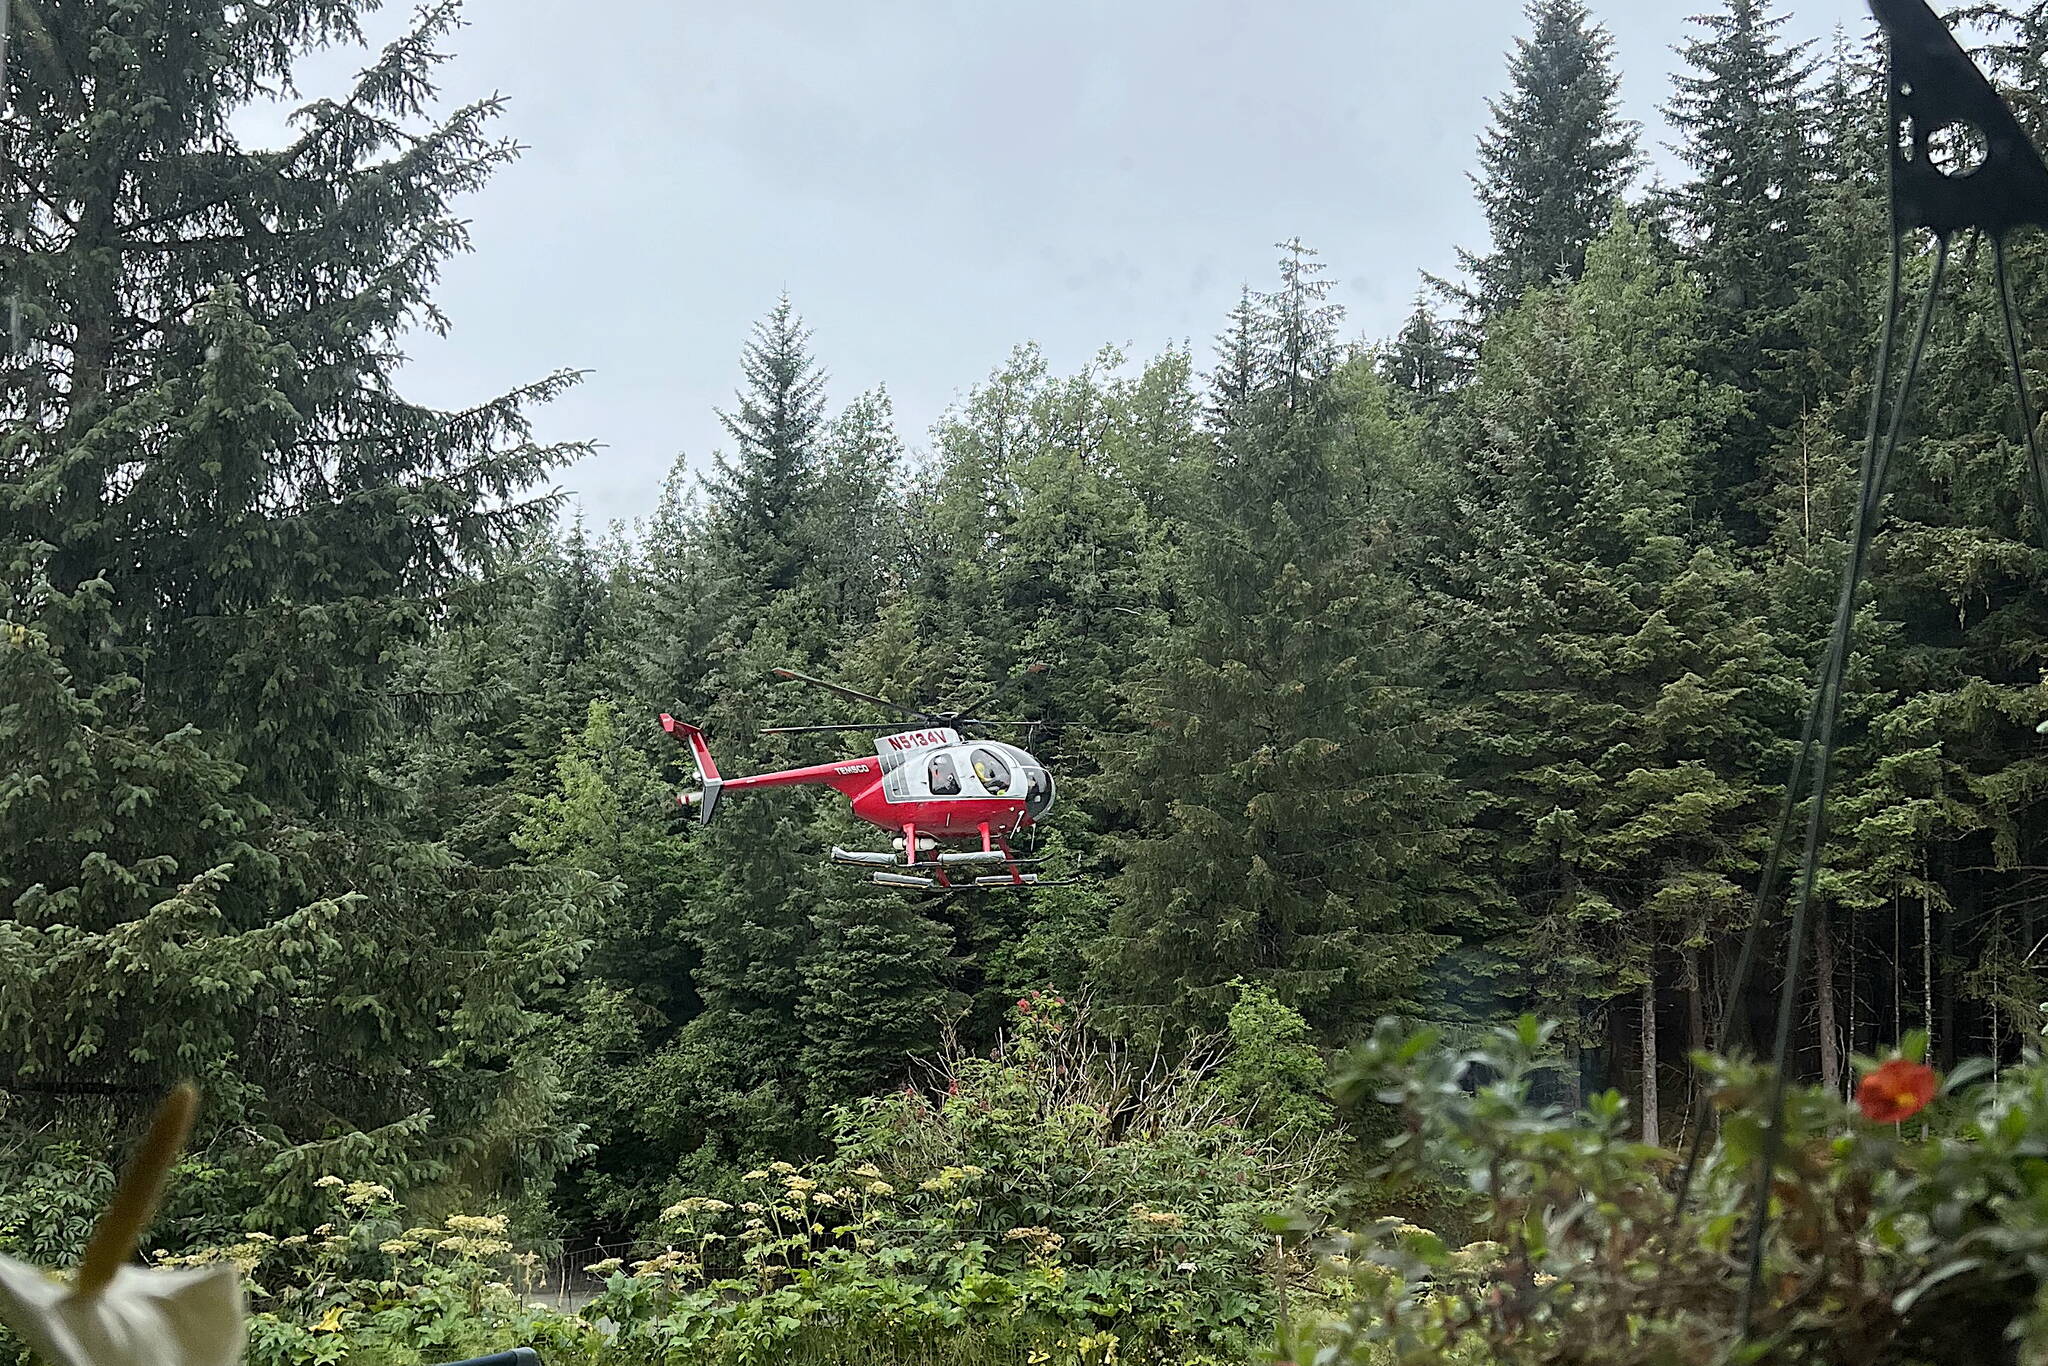 A Temsco Helicopters aircraft participates in a search along the Mendenhall River on Monday for a person reported missing since last Tuesday, who was last seen kayaking toward the Mendenhall Glacier. (Courtesy Photo/ Megan Rigas)